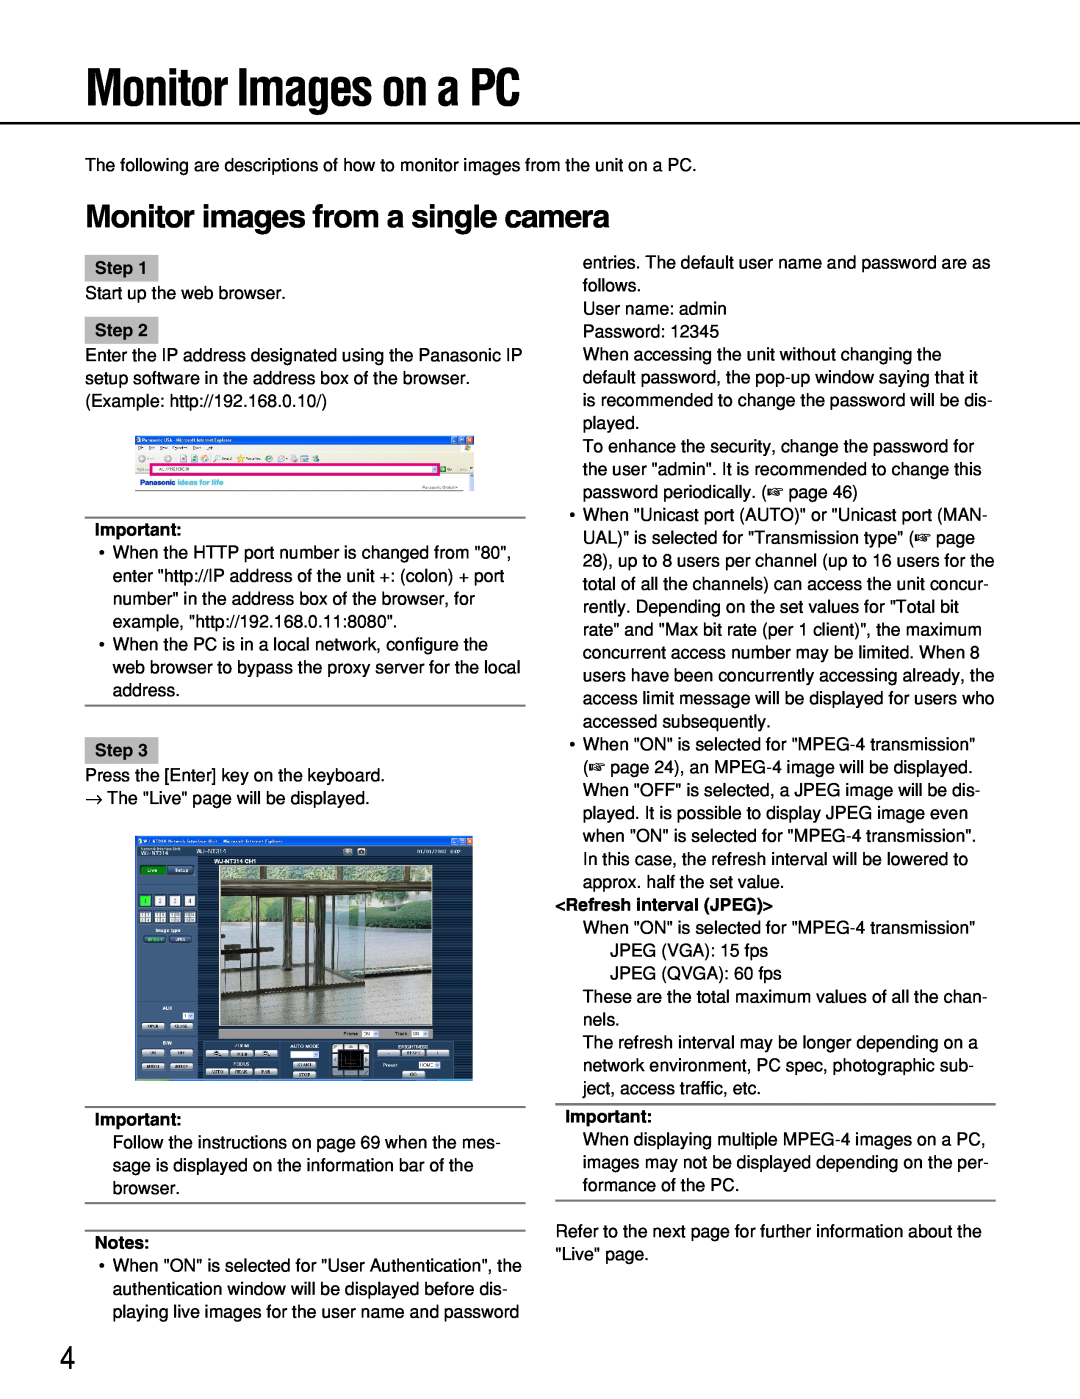 Panasonic WJ-NT314 manual Monitor Images on a PC, Step, Refresh interval JPEG 